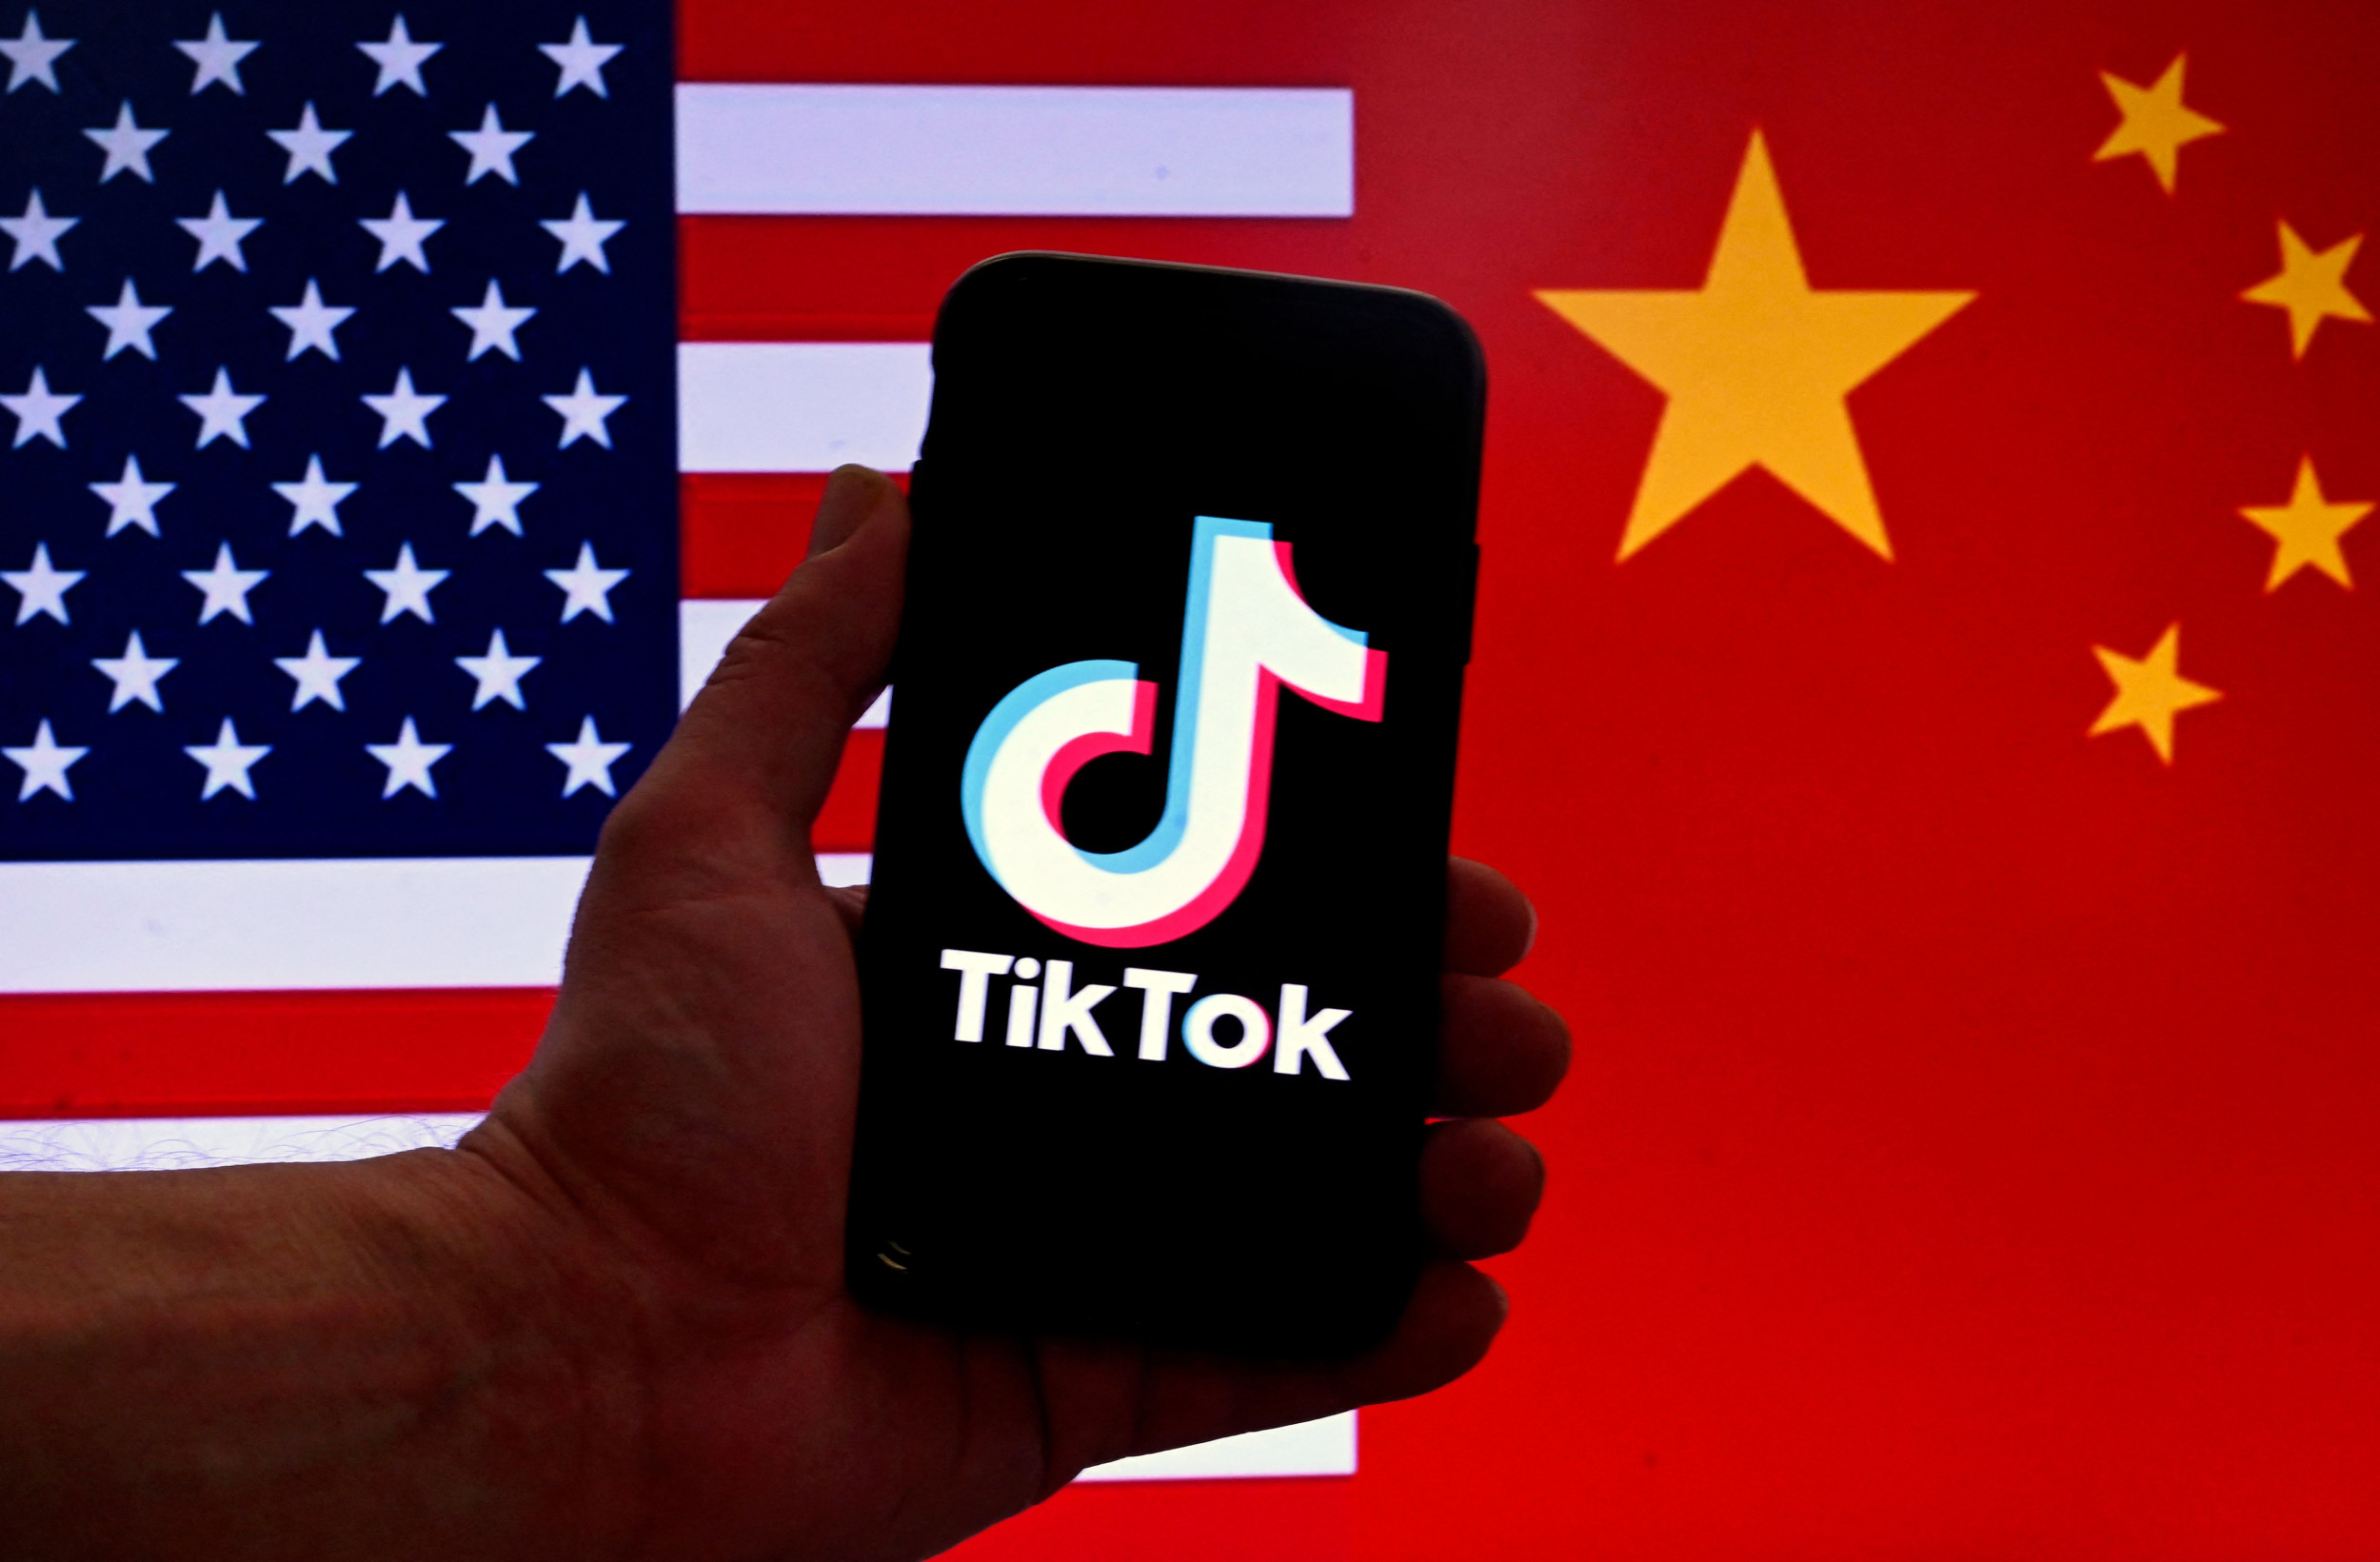 Don't Put Tiktok Out of Business Based on Hypotheticals | Opinion